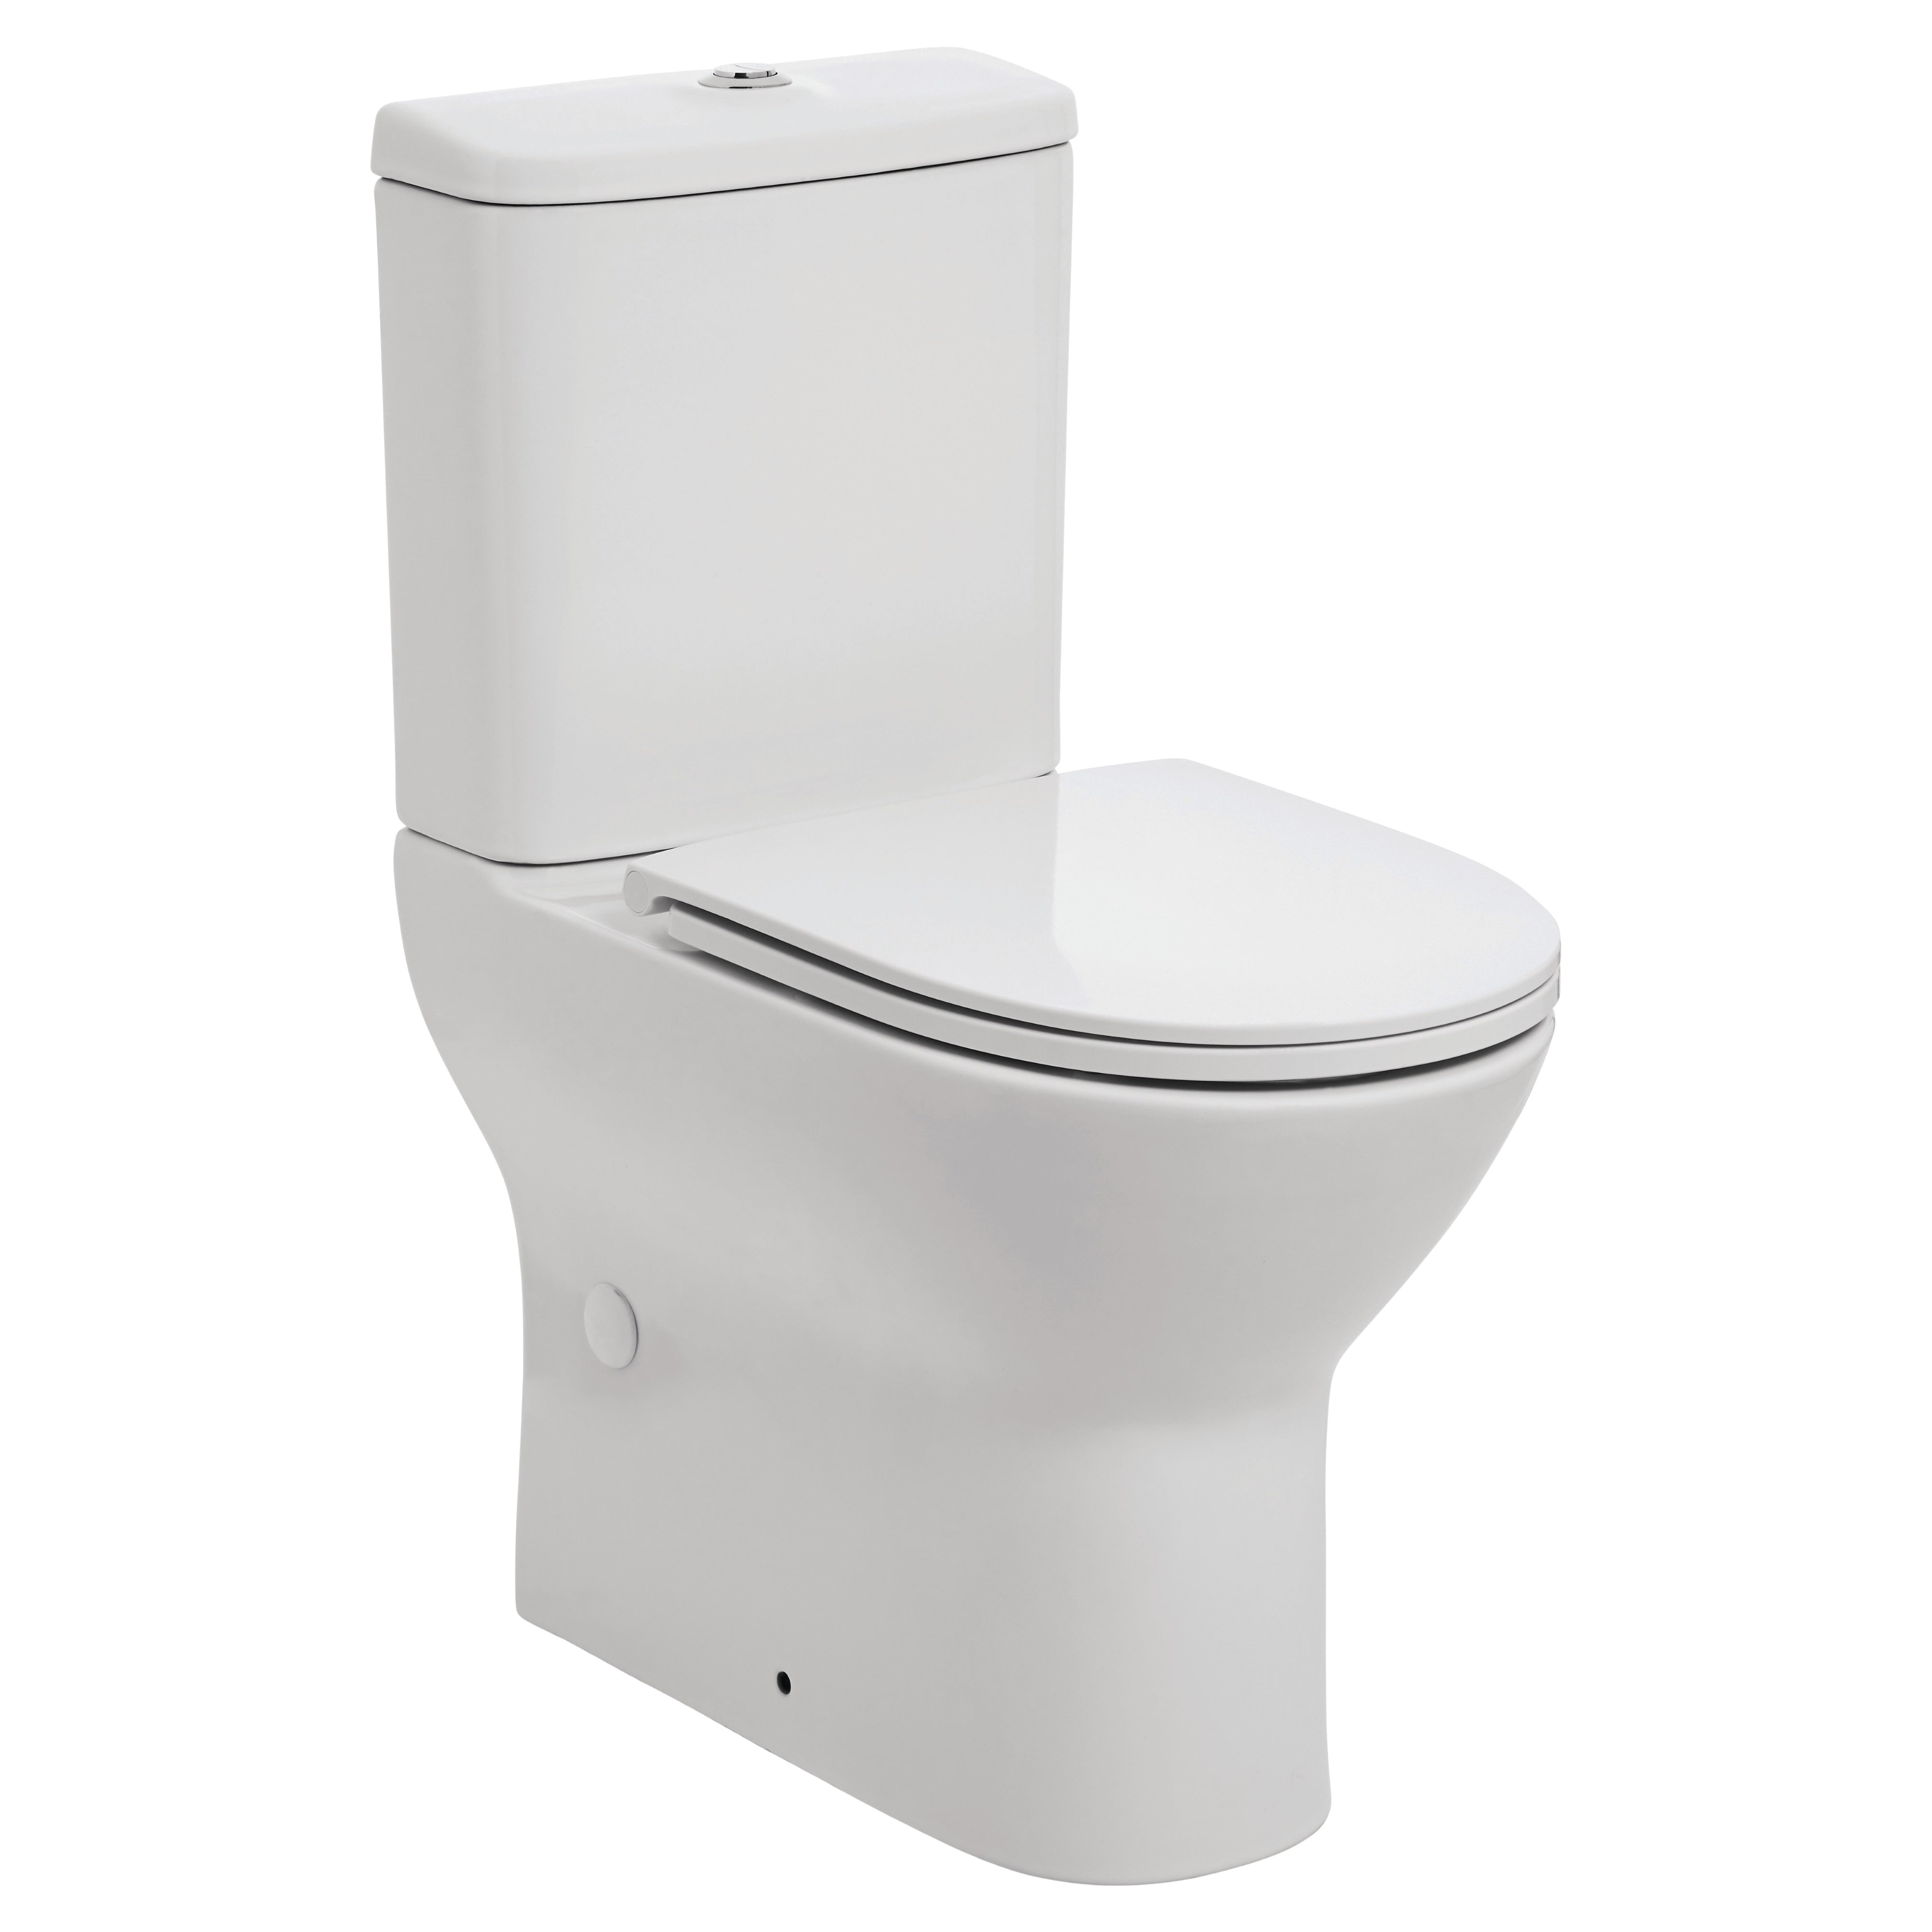 SENZA S/PROJECTION RIMLESS WC PACK - Bathroom & Heating leading